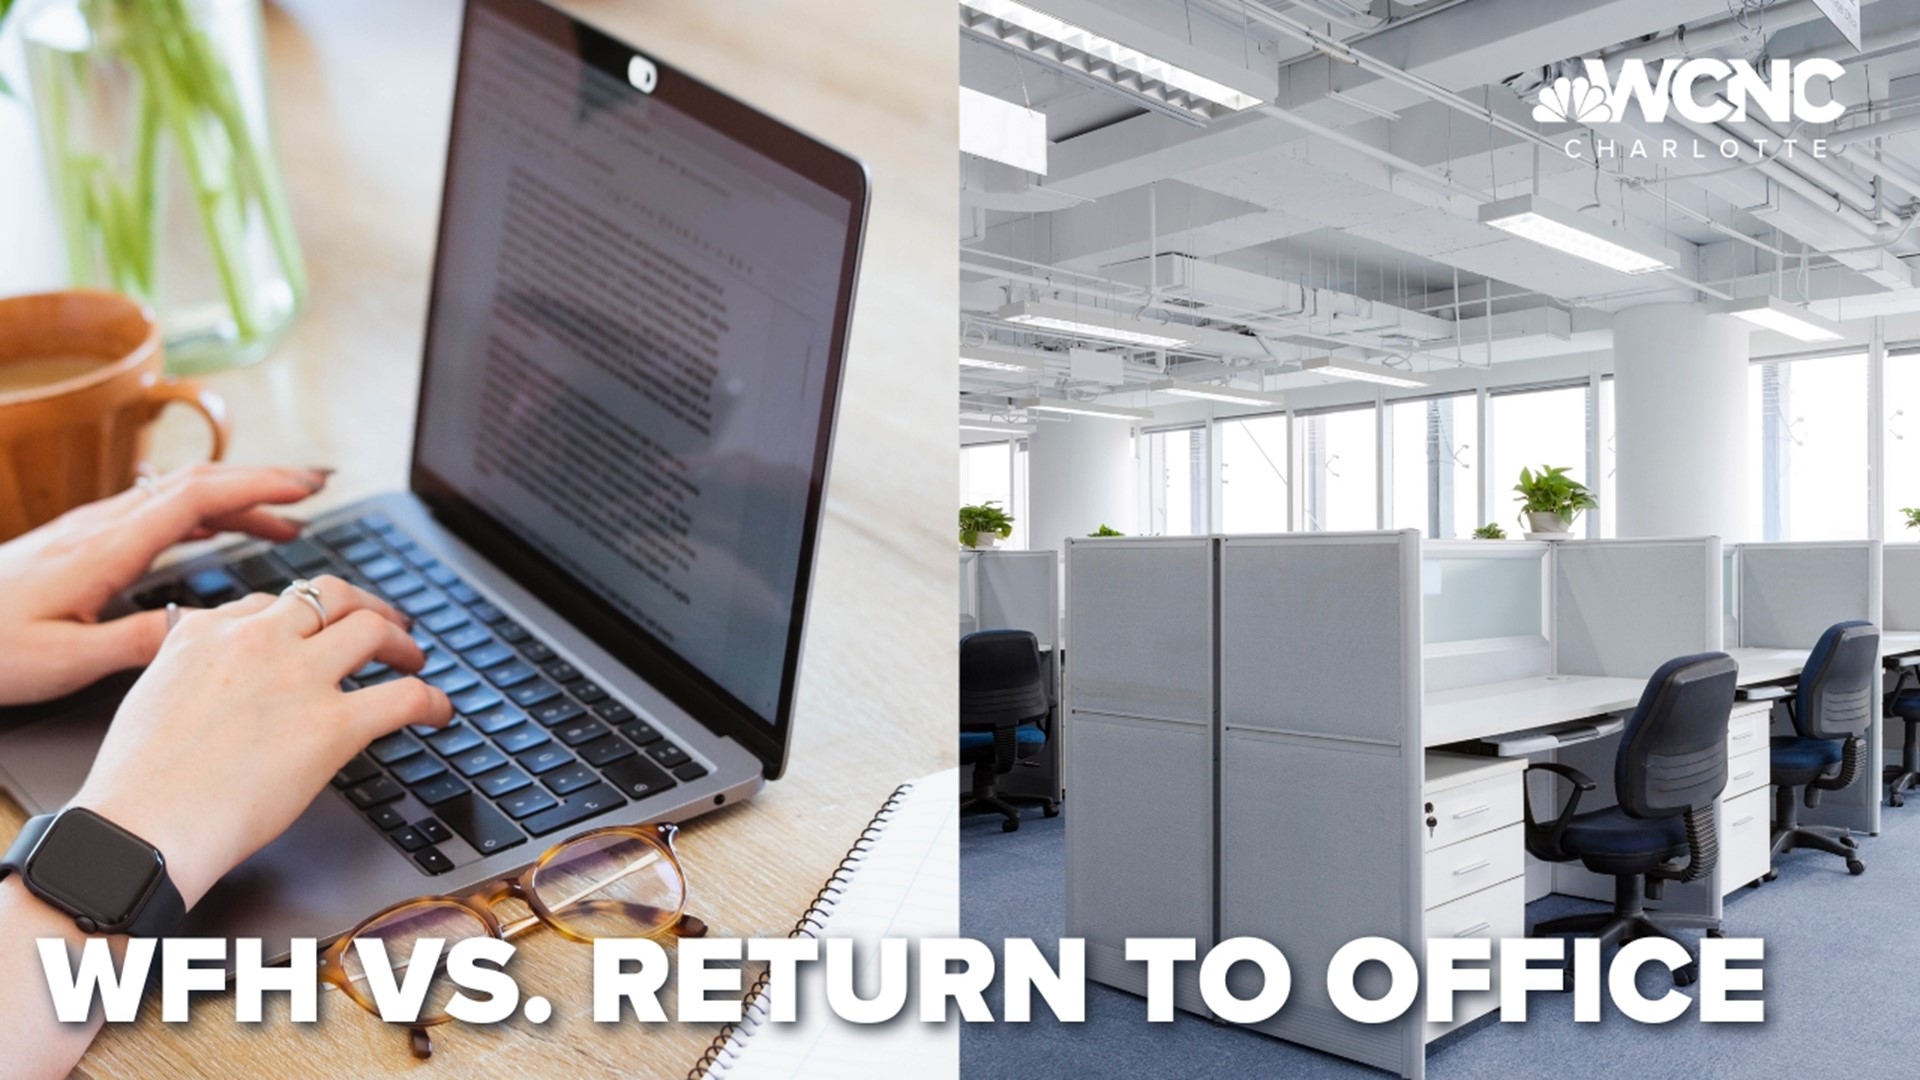 With kids back in school, some companies expect to see more of those parents return back in the office.